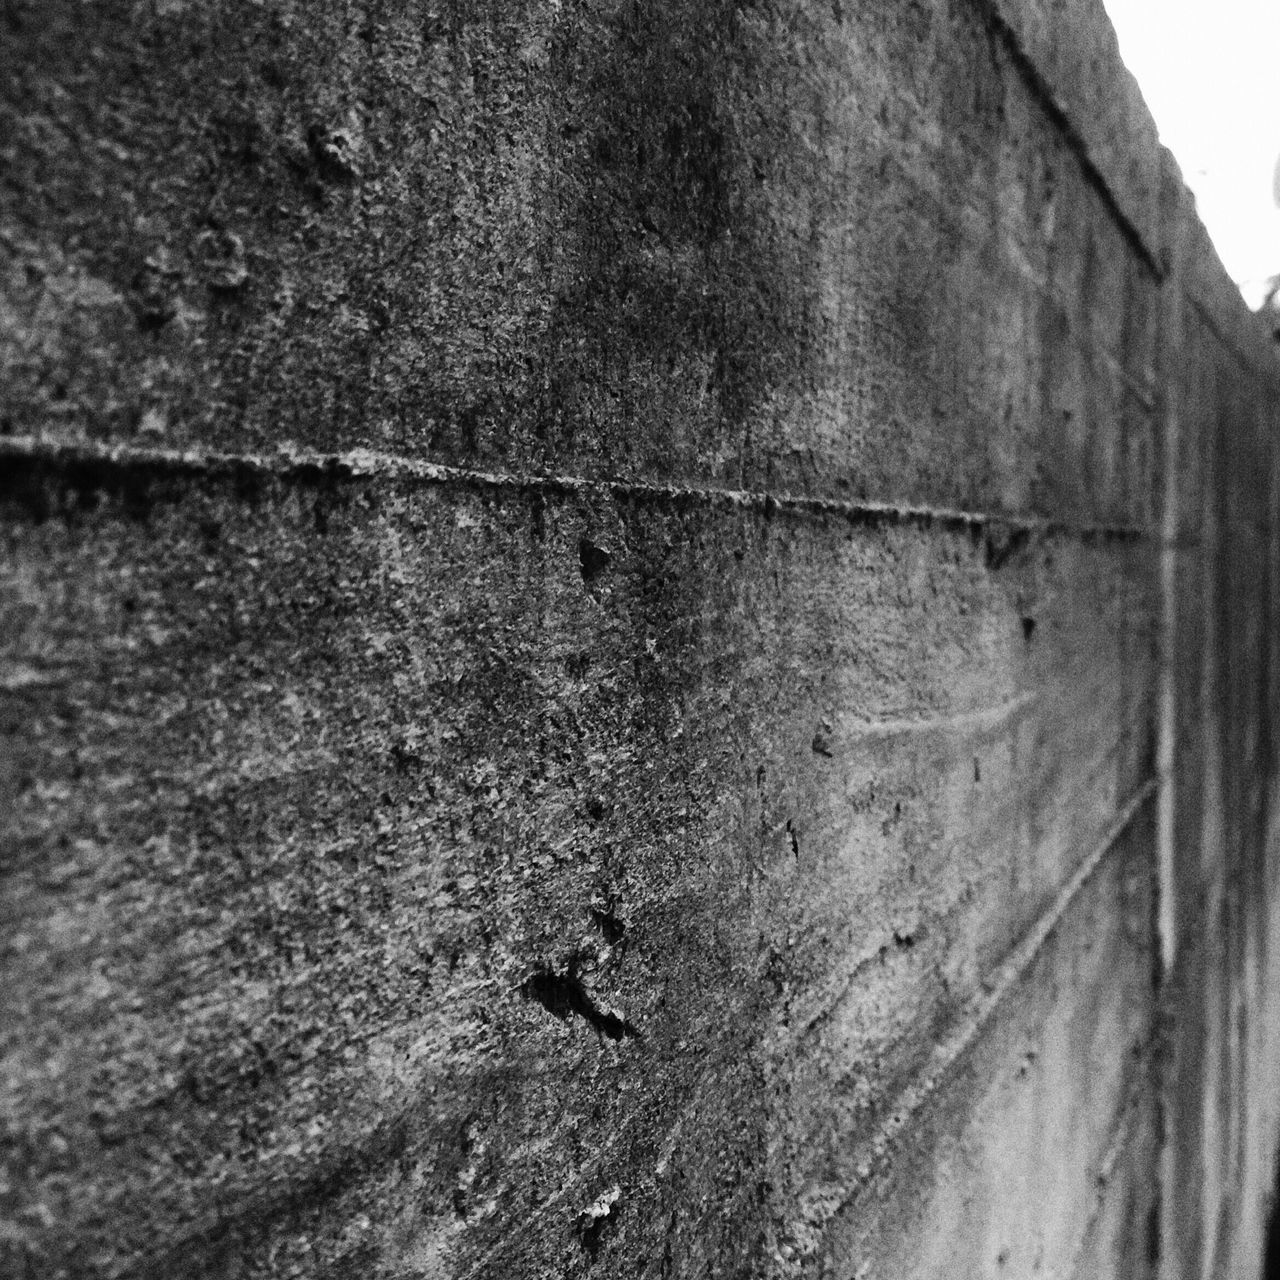 textured, rough, weathered, full frame, wall - building feature, old, low angle view, architecture, backgrounds, built structure, close-up, no people, outdoors, day, damaged, pattern, nature, wall, cracked, deterioration